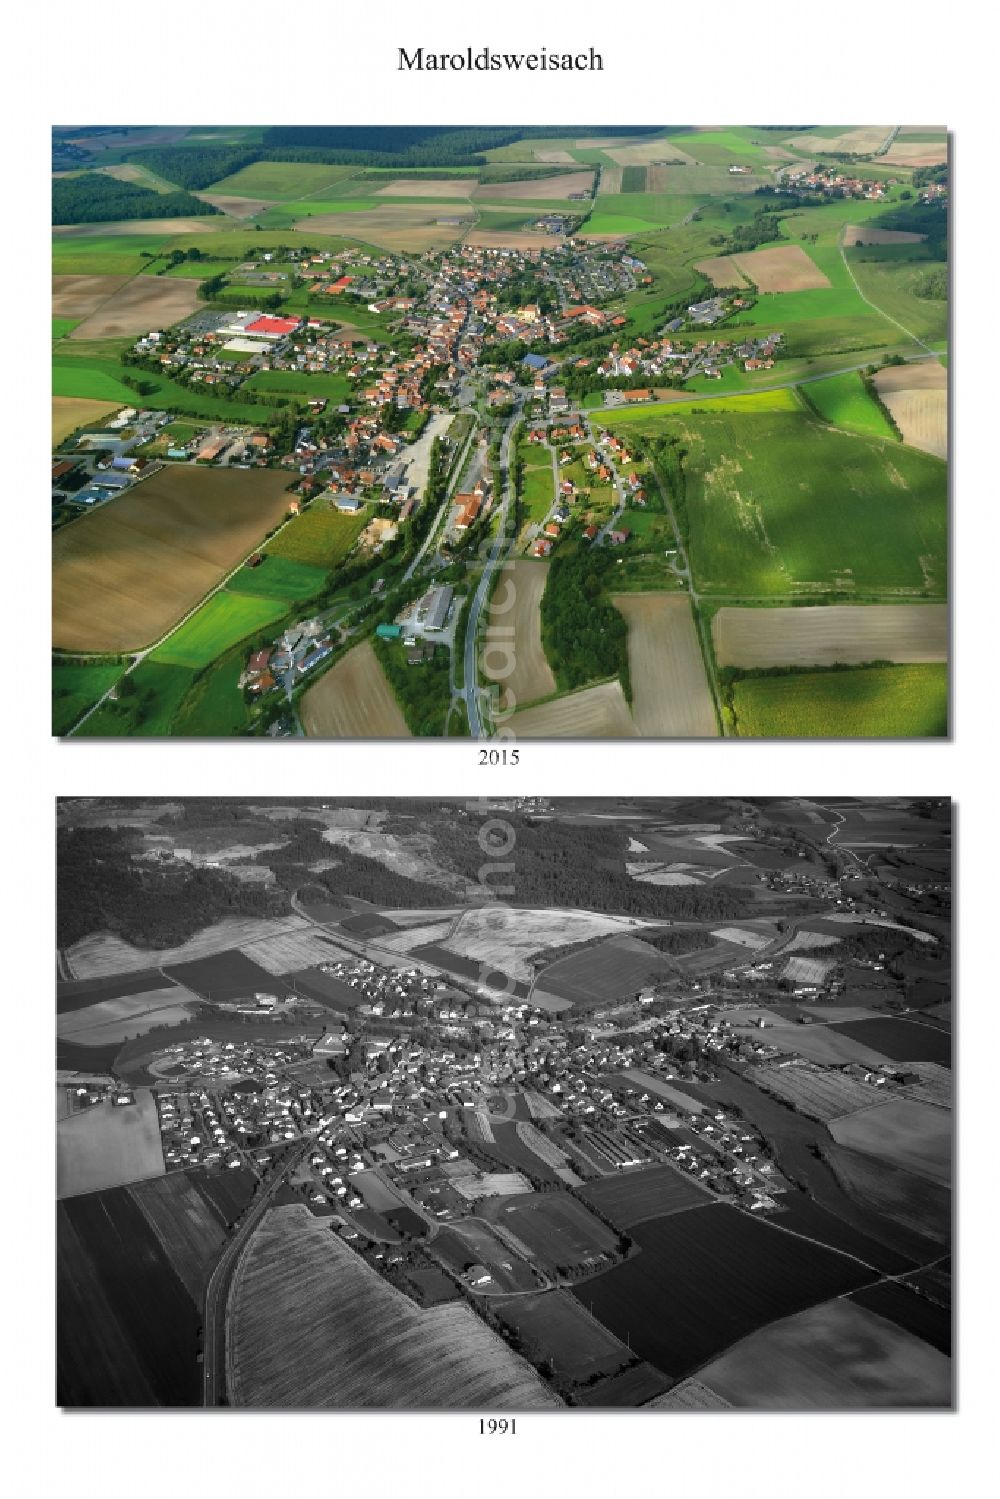 Aerial photograph Maroldsweisach - 1991 and 2015 village - view change of Maroldsweisach in the state Bavaria